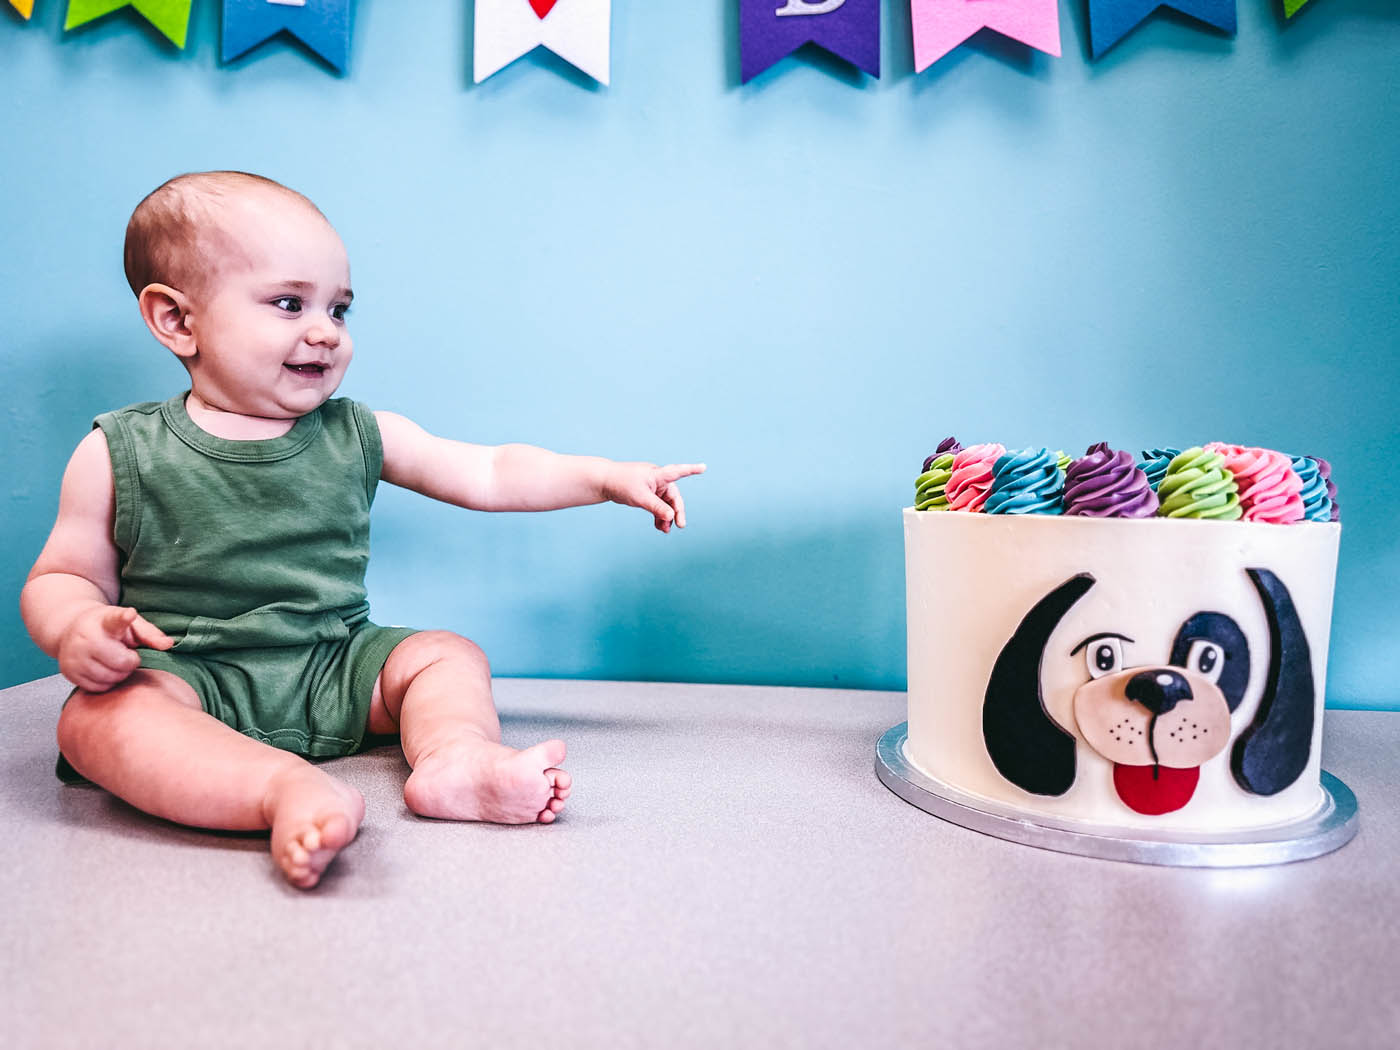 A little baby boy sitting next to a Rompy cake, book a birthday party in St. Petersburg, FL!